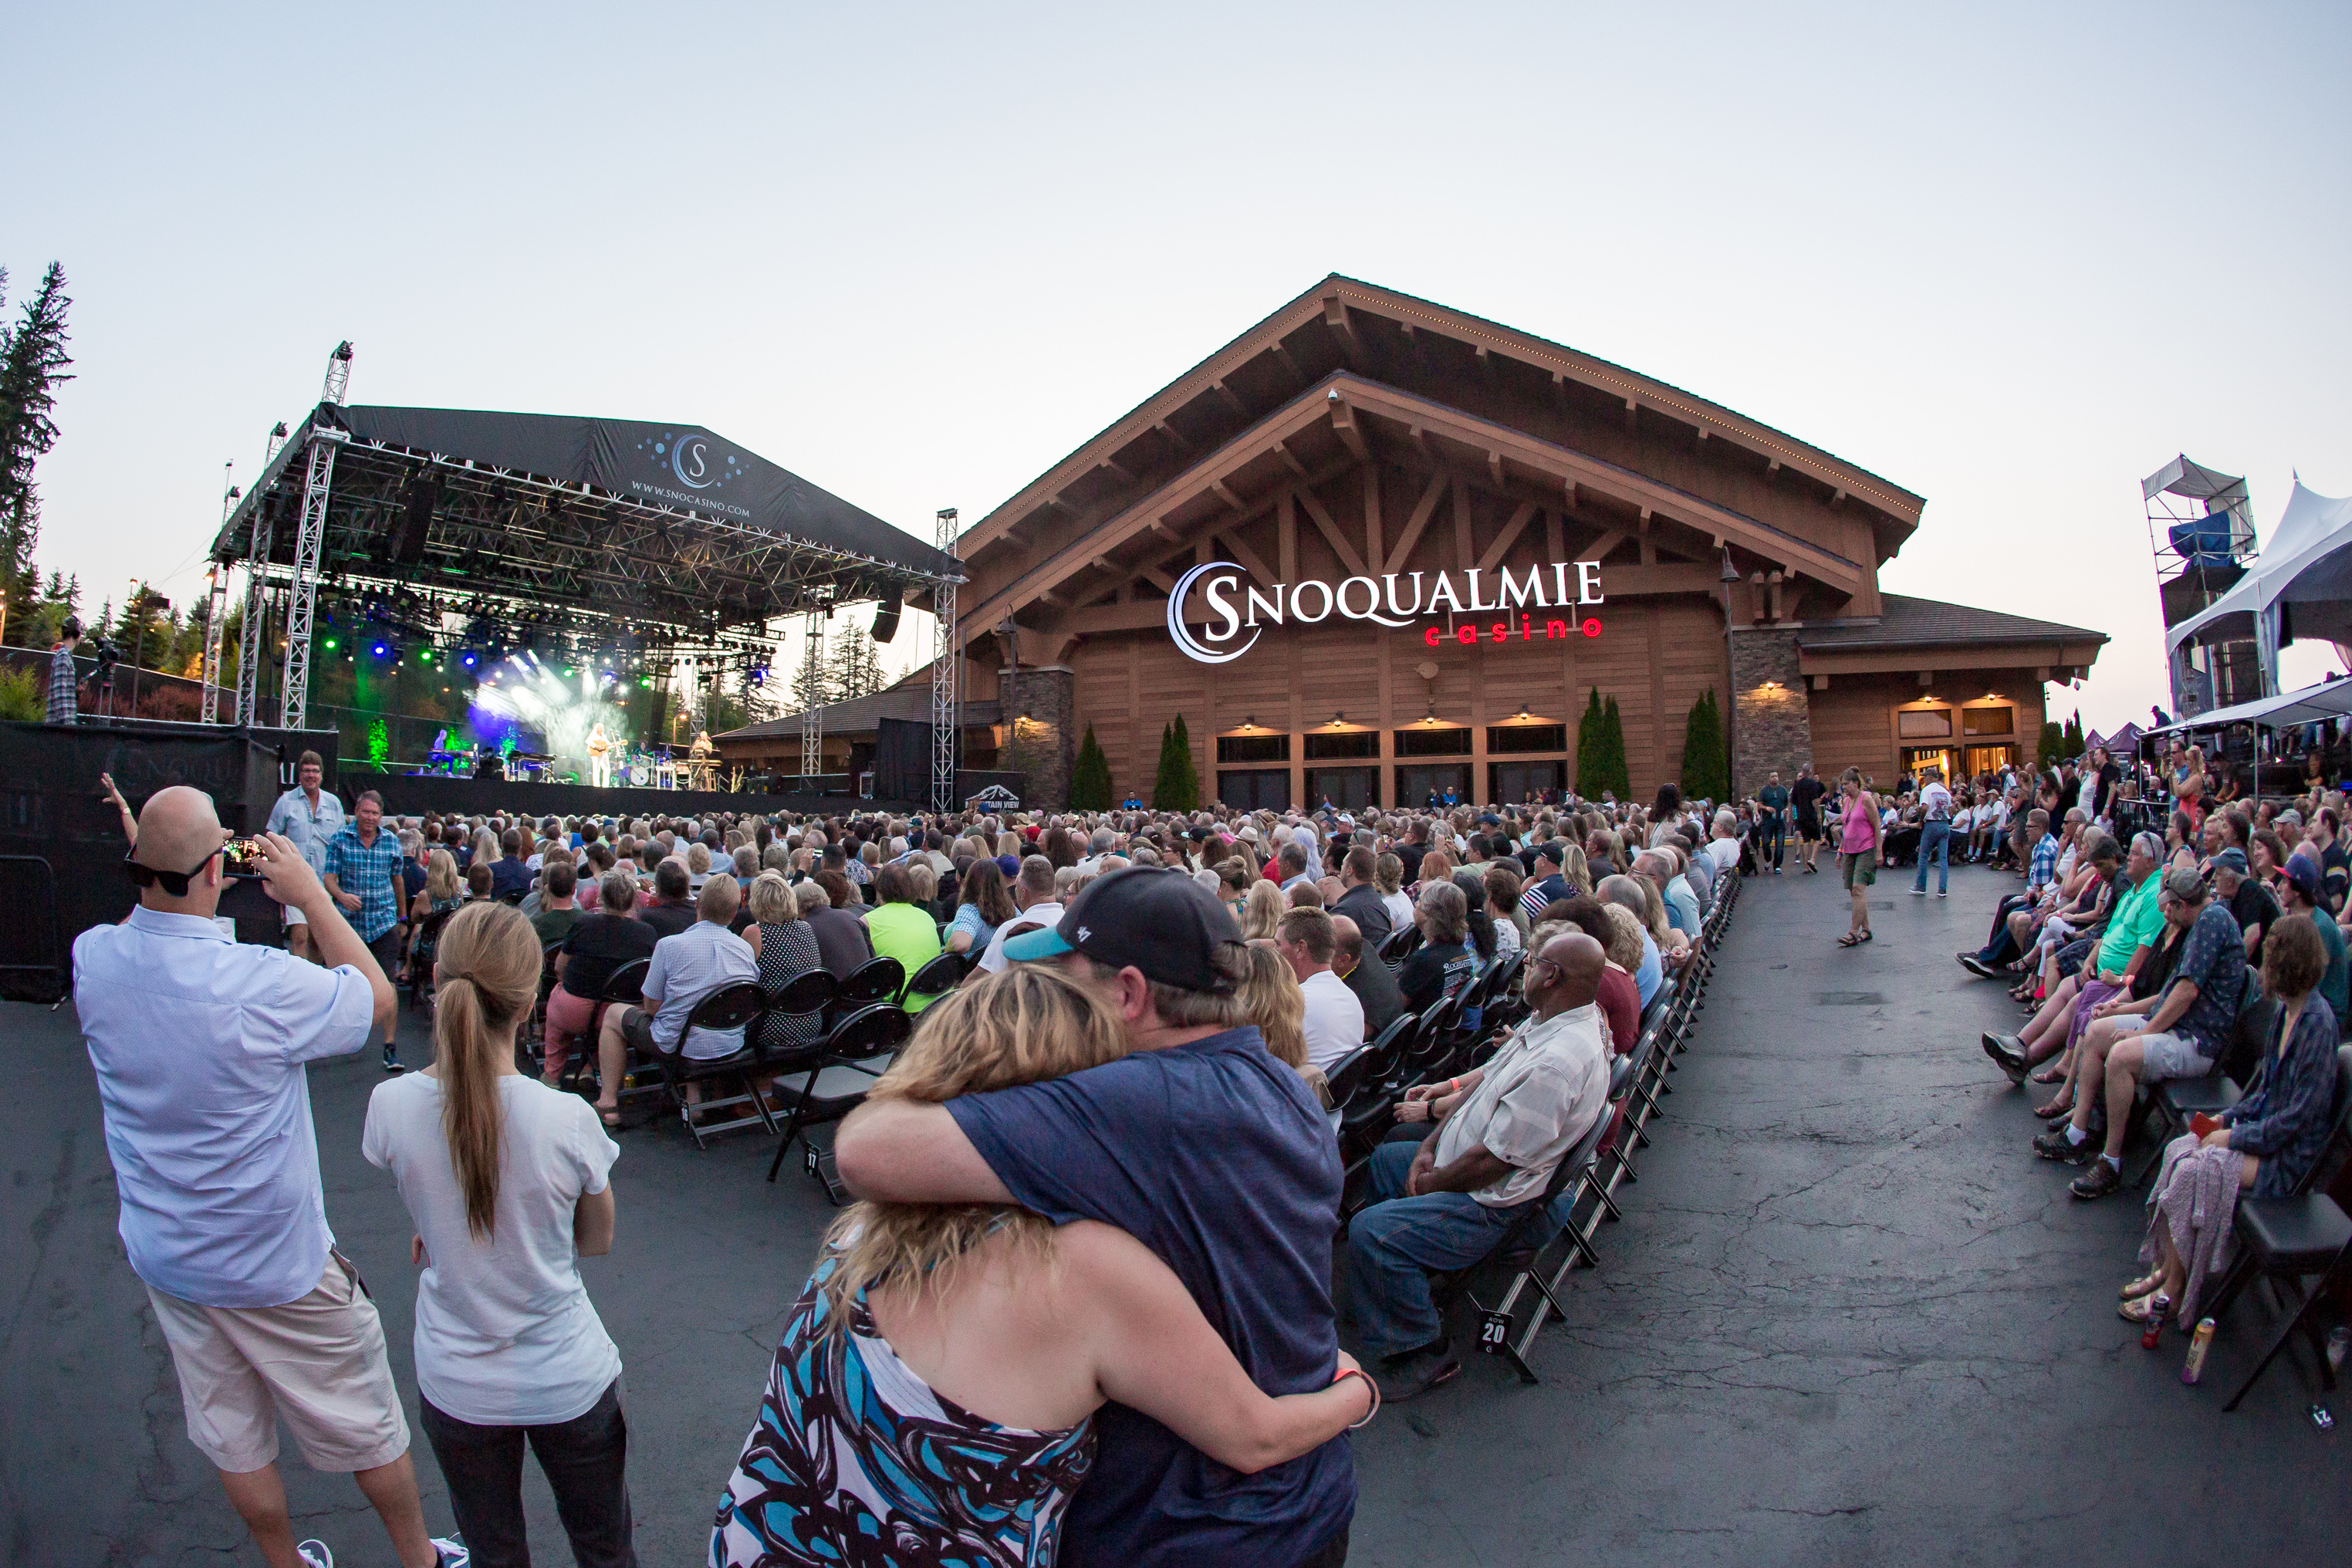 snoqualmie casino vip tickets to summer concerts